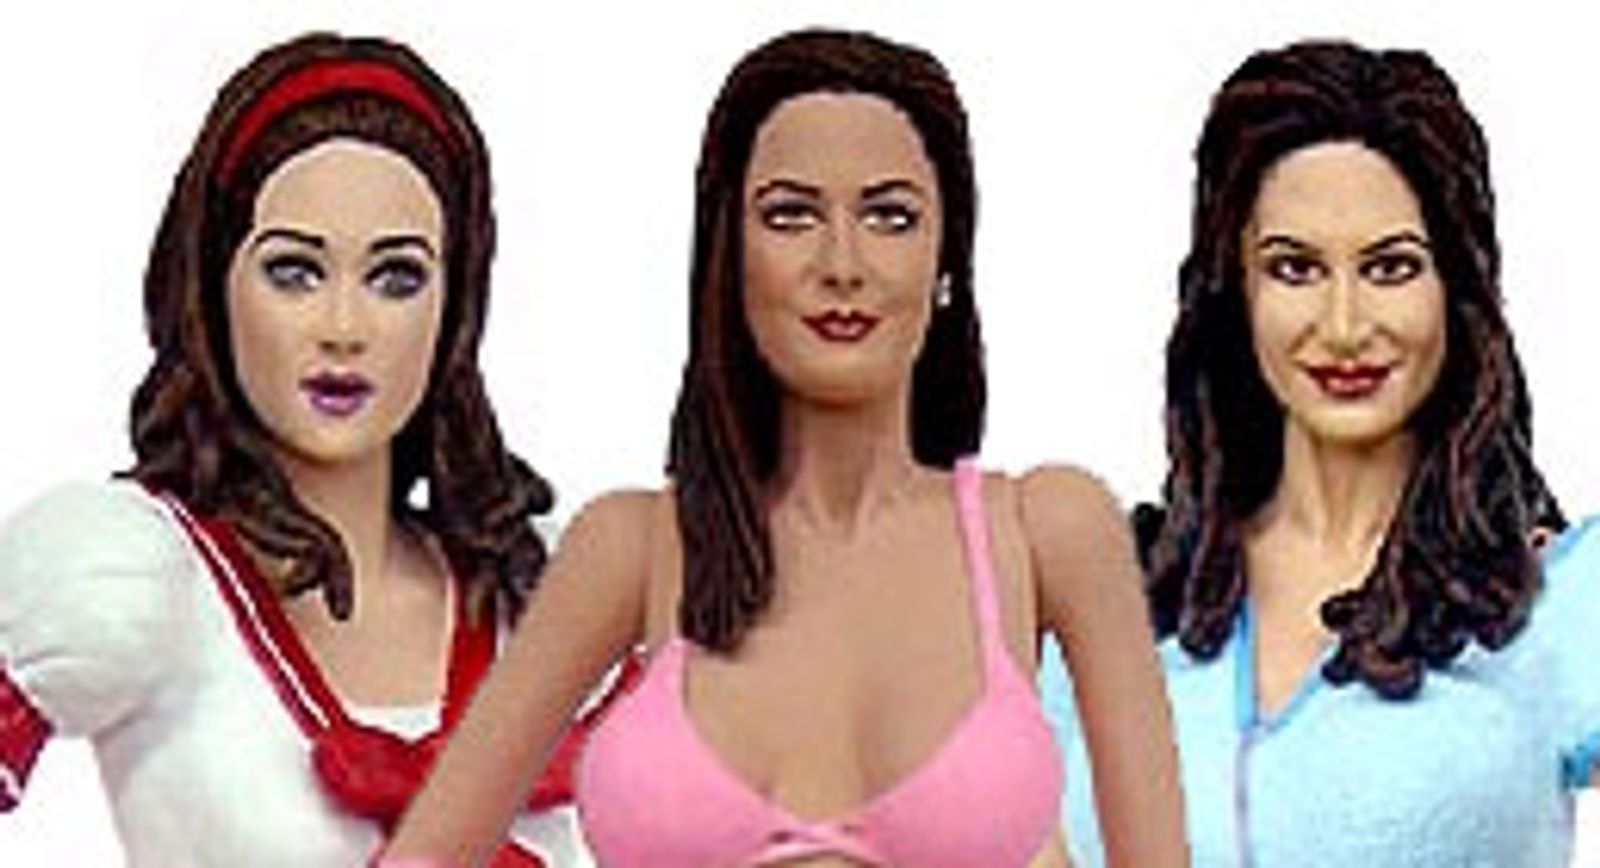 Wicked Pictures, Plastic Fantasy Release &#8220;The Women Of Wicked&#8221; Action Figures